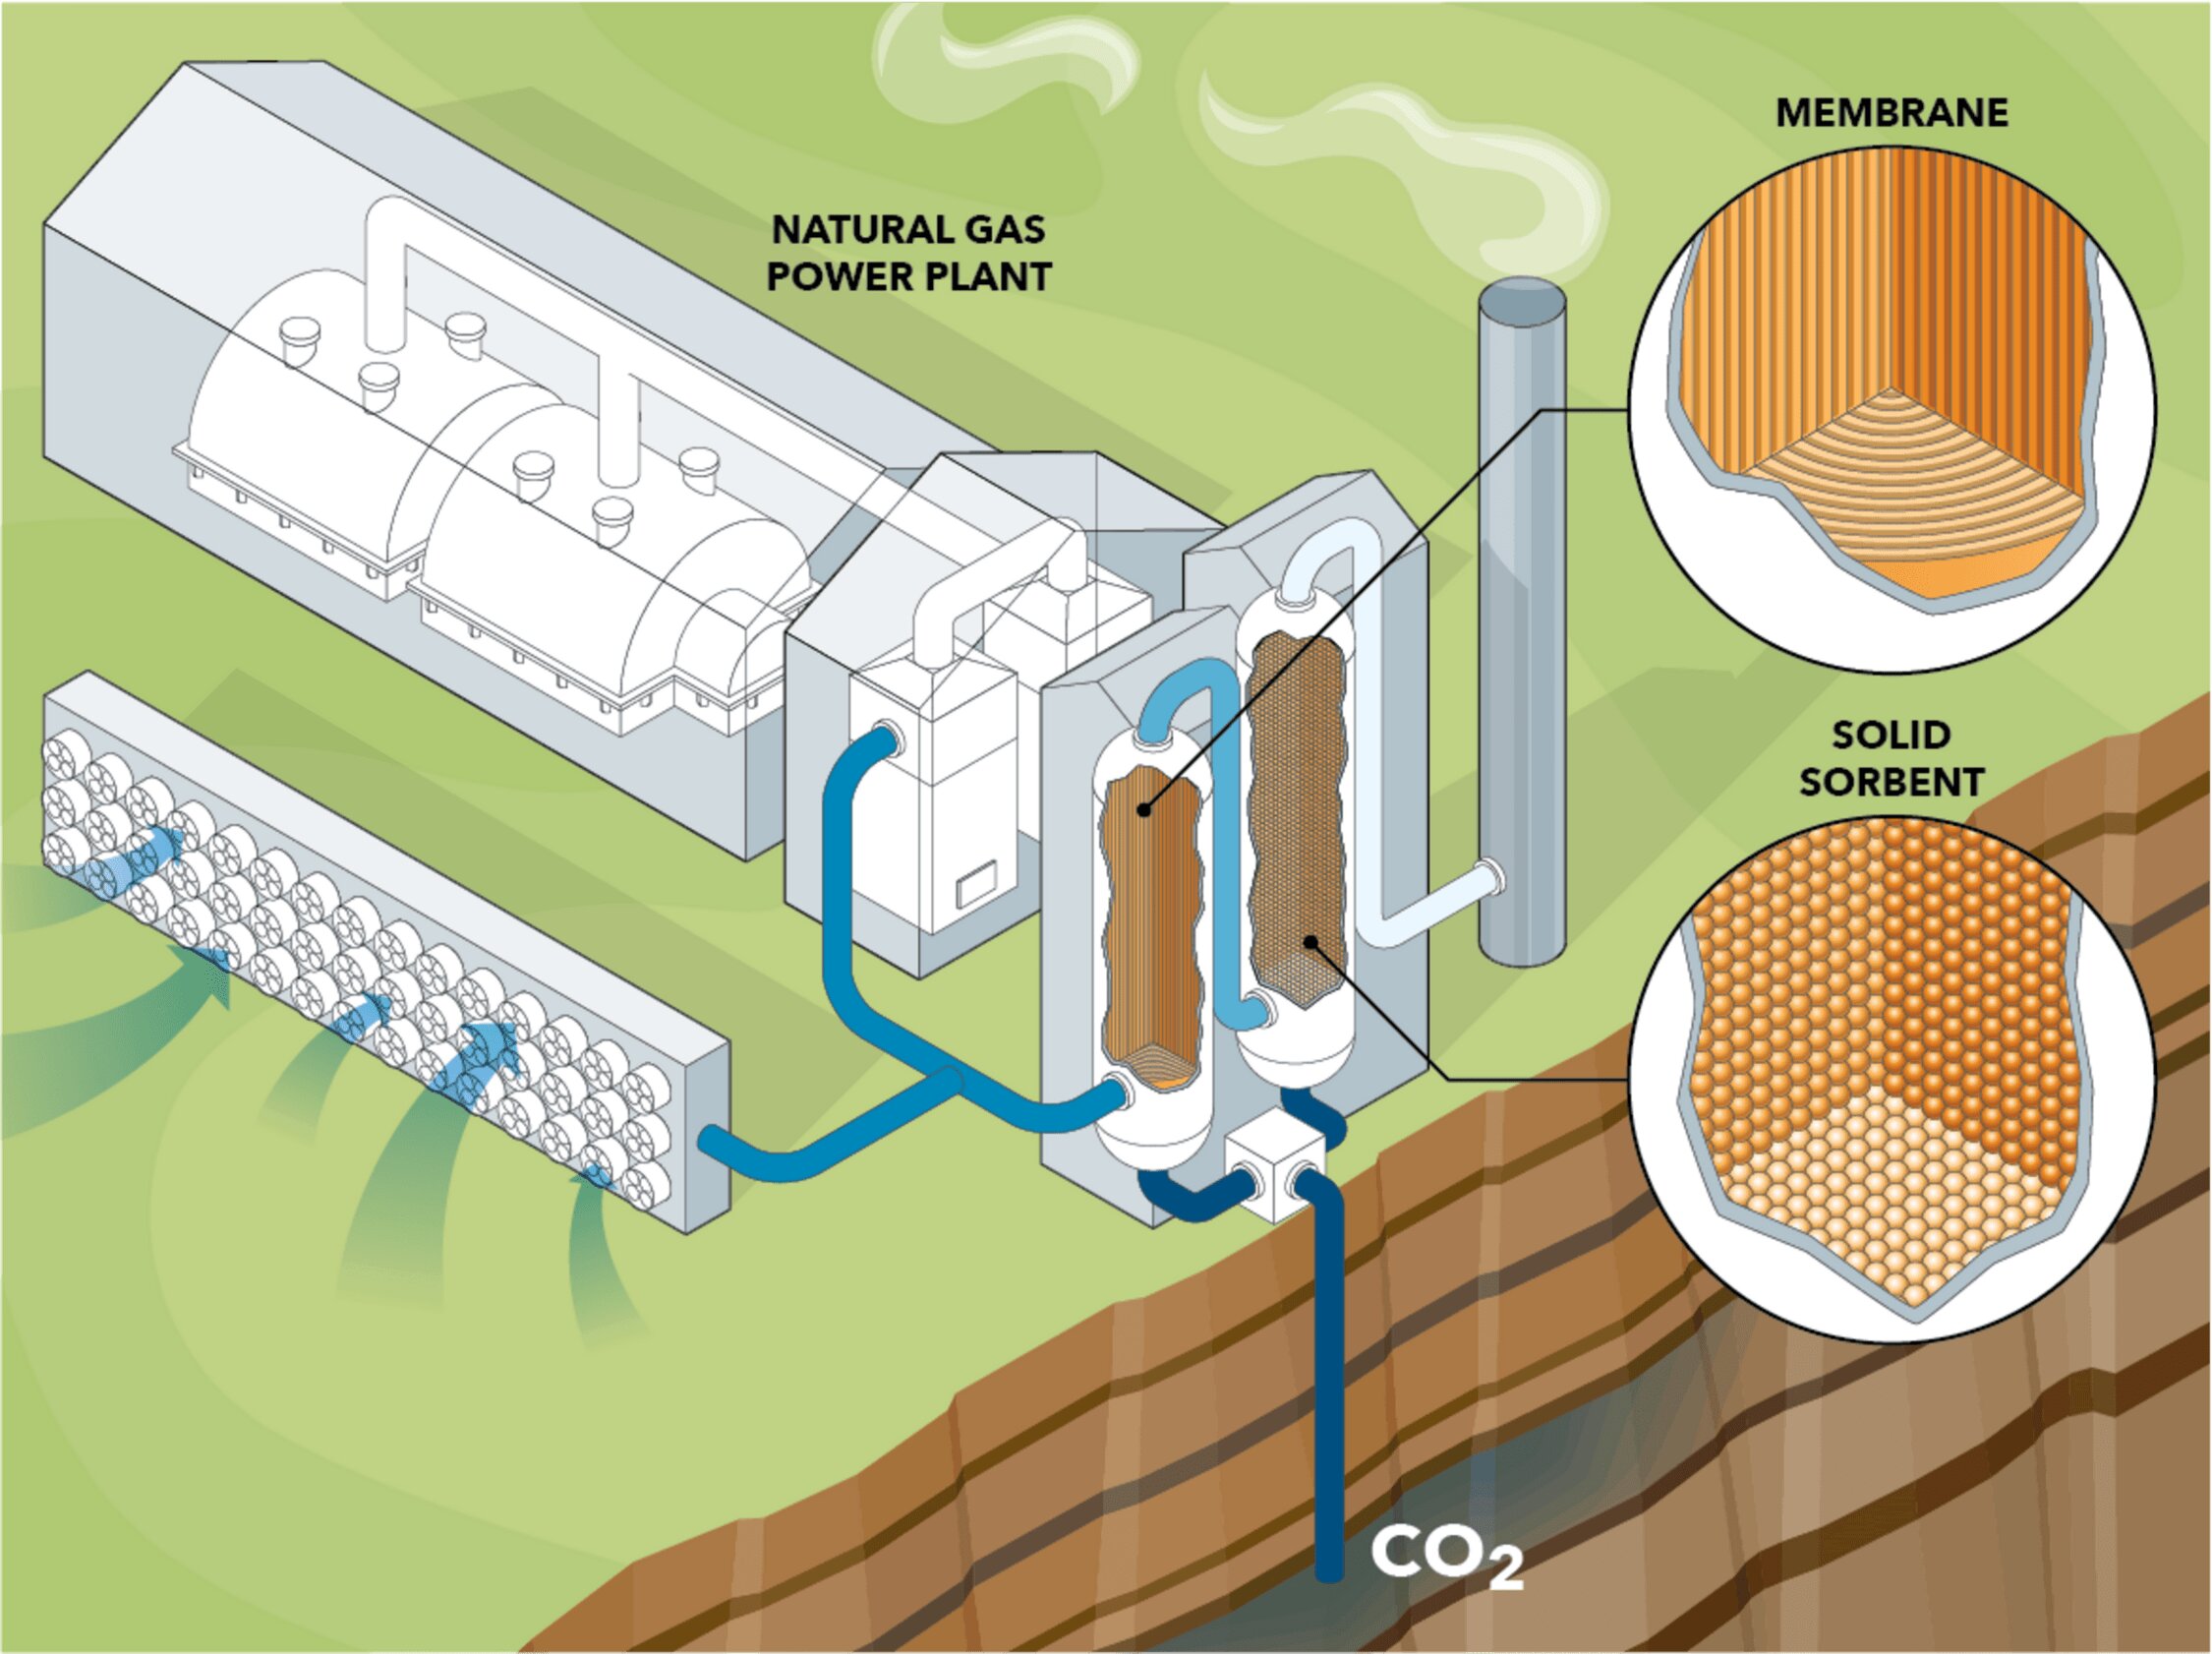 Turning the problem into the solution in natural gas power plants